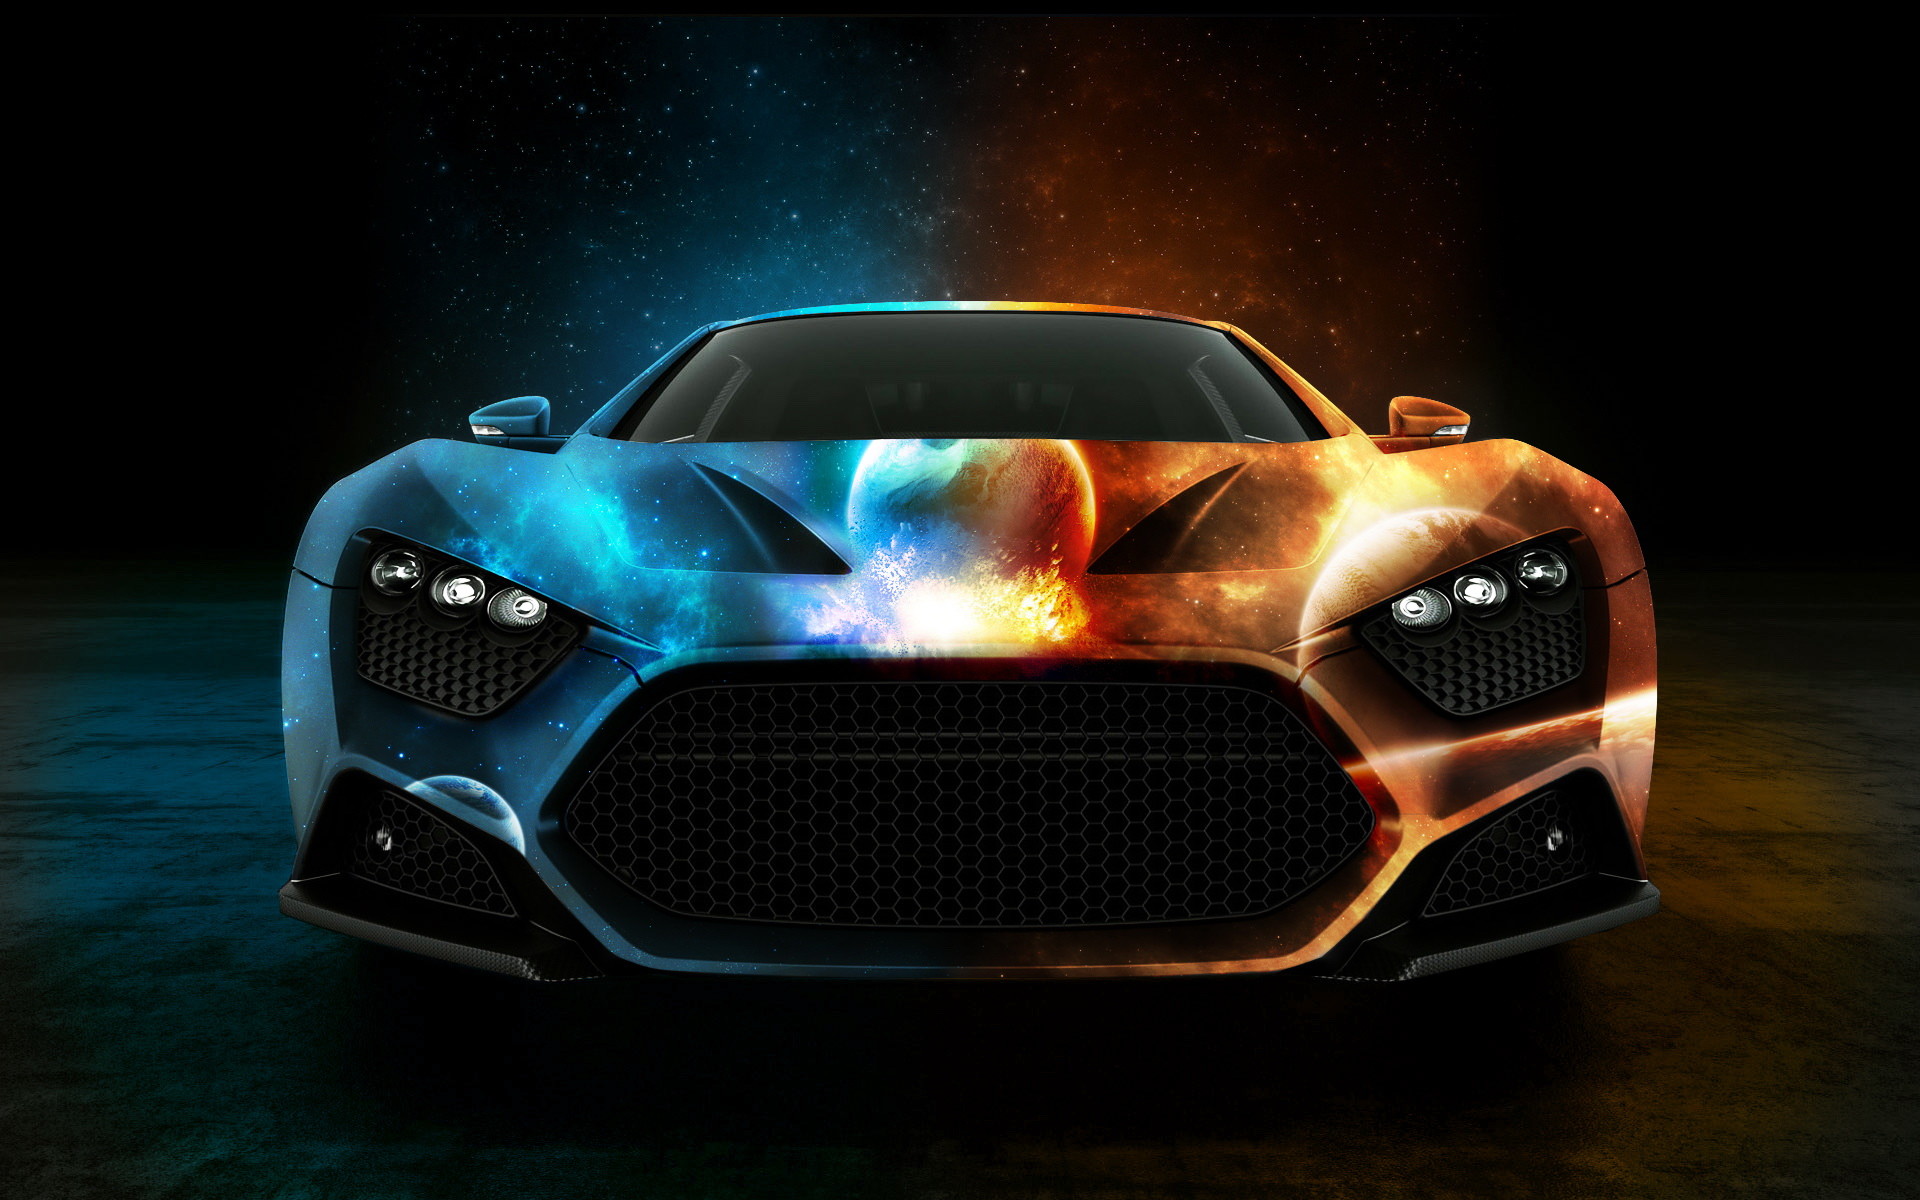 1920x1200 Pixel Desktop Wallpapers Really Cool Backgrounds For Tumblr Car